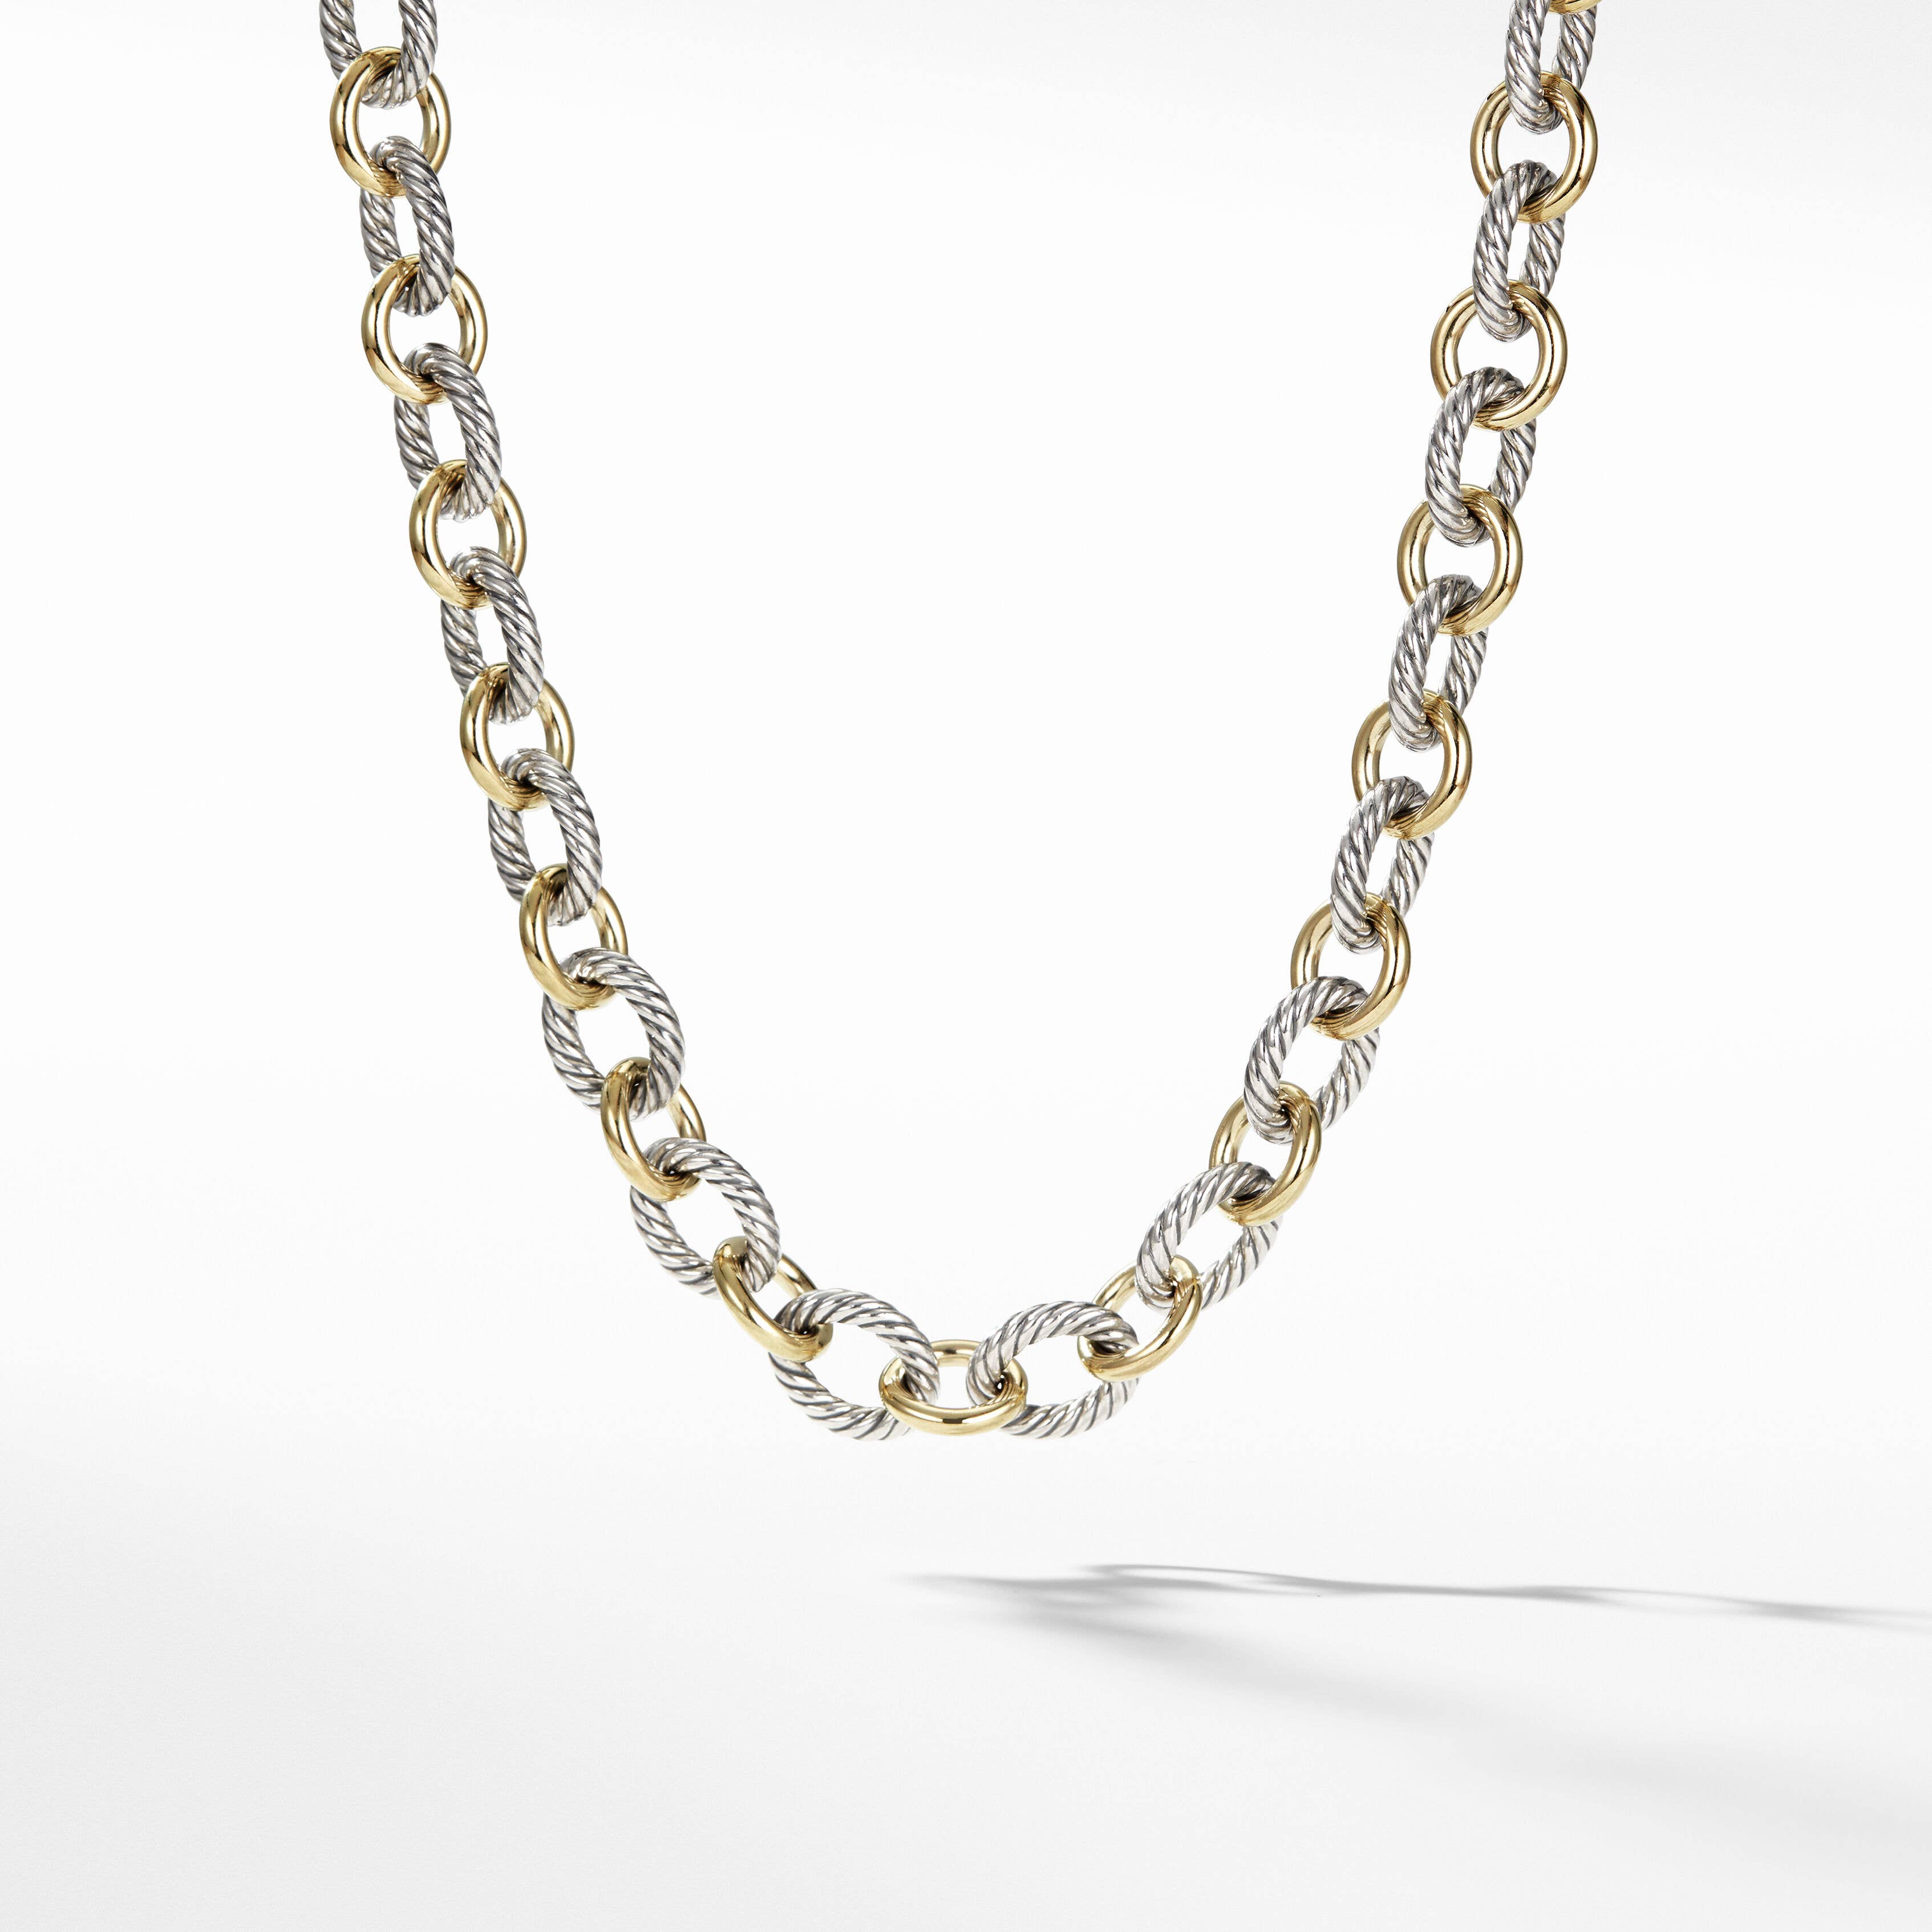 Oval Link Chain Necklace with 18K Yellow Gold